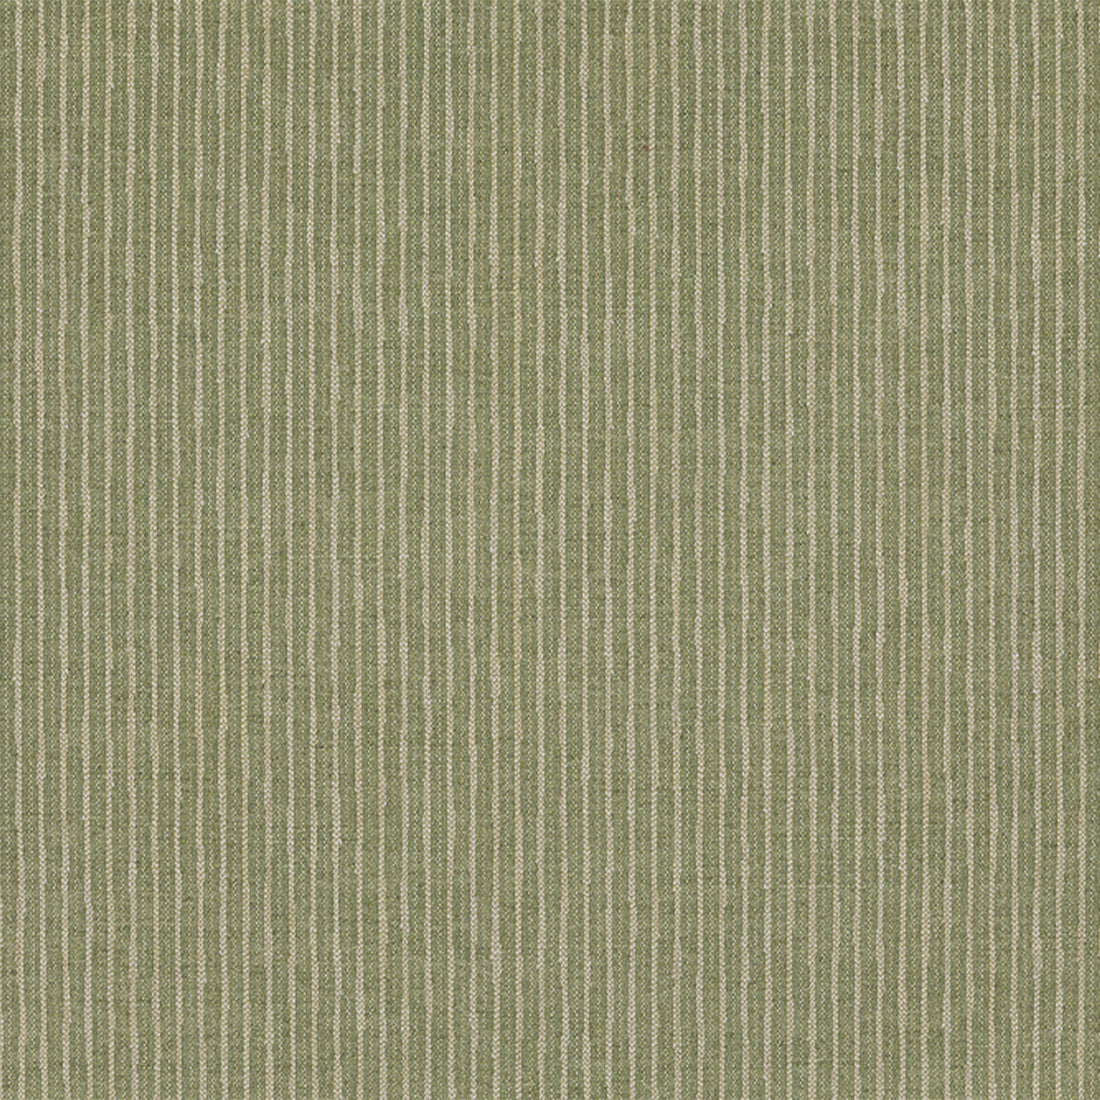 Bailey fabric in moss color - pattern BFC-3700.3.0 - by Lee Jofa in the Blithfield collection